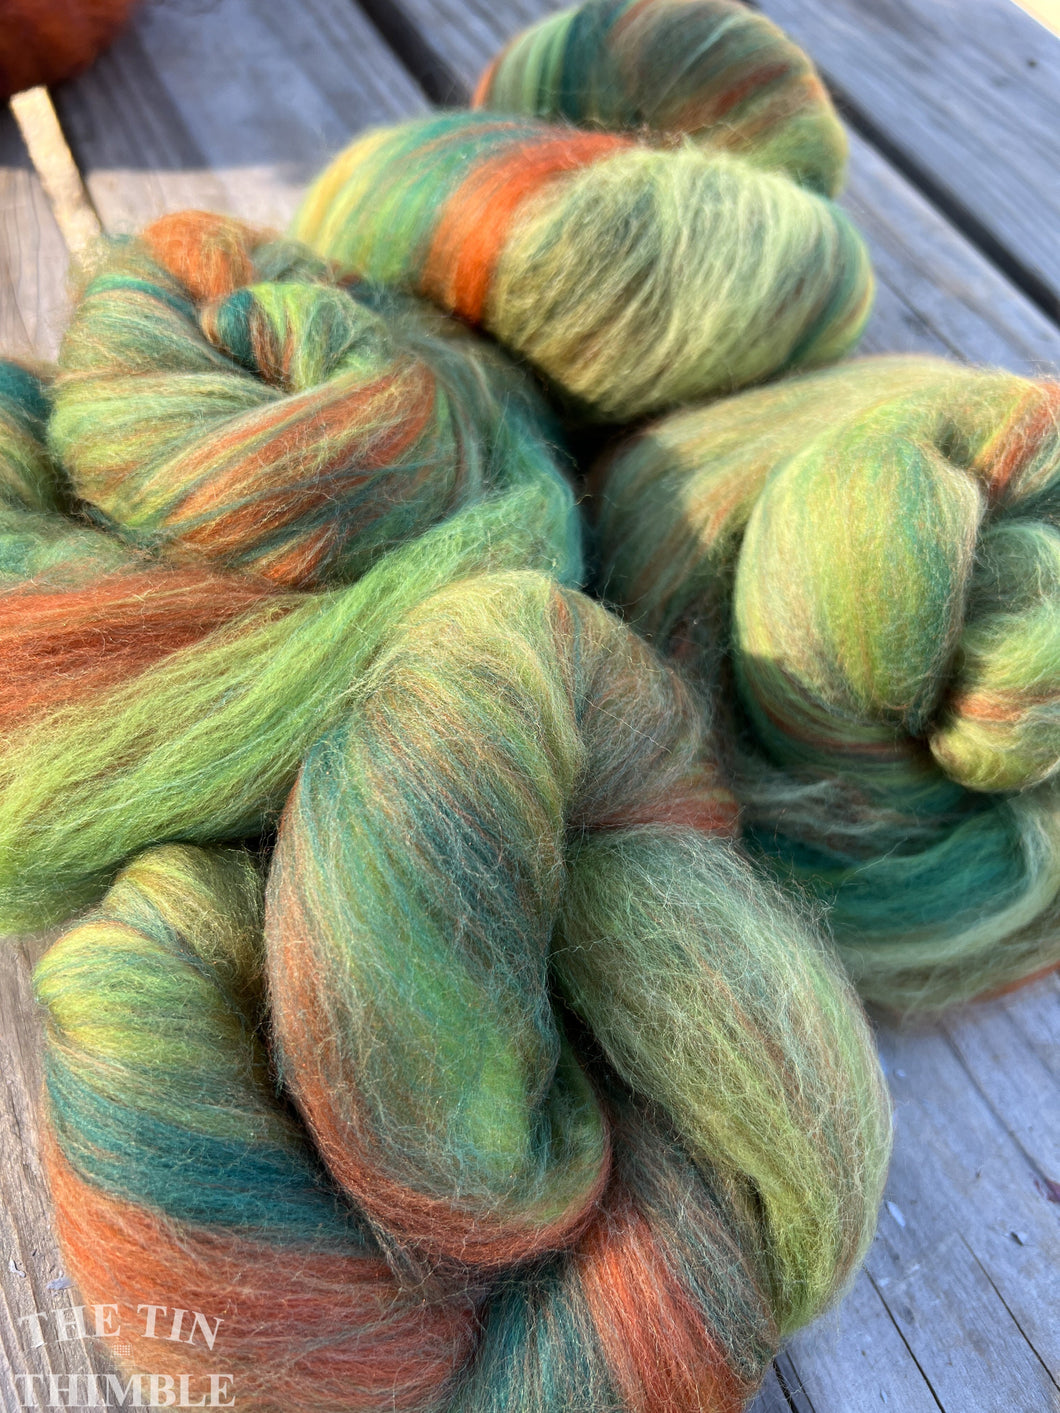 Hand Carded Batt for Felting or Spinning - Merino Blend - Hand Dyed and Commercially Dyed Fibers - Earth